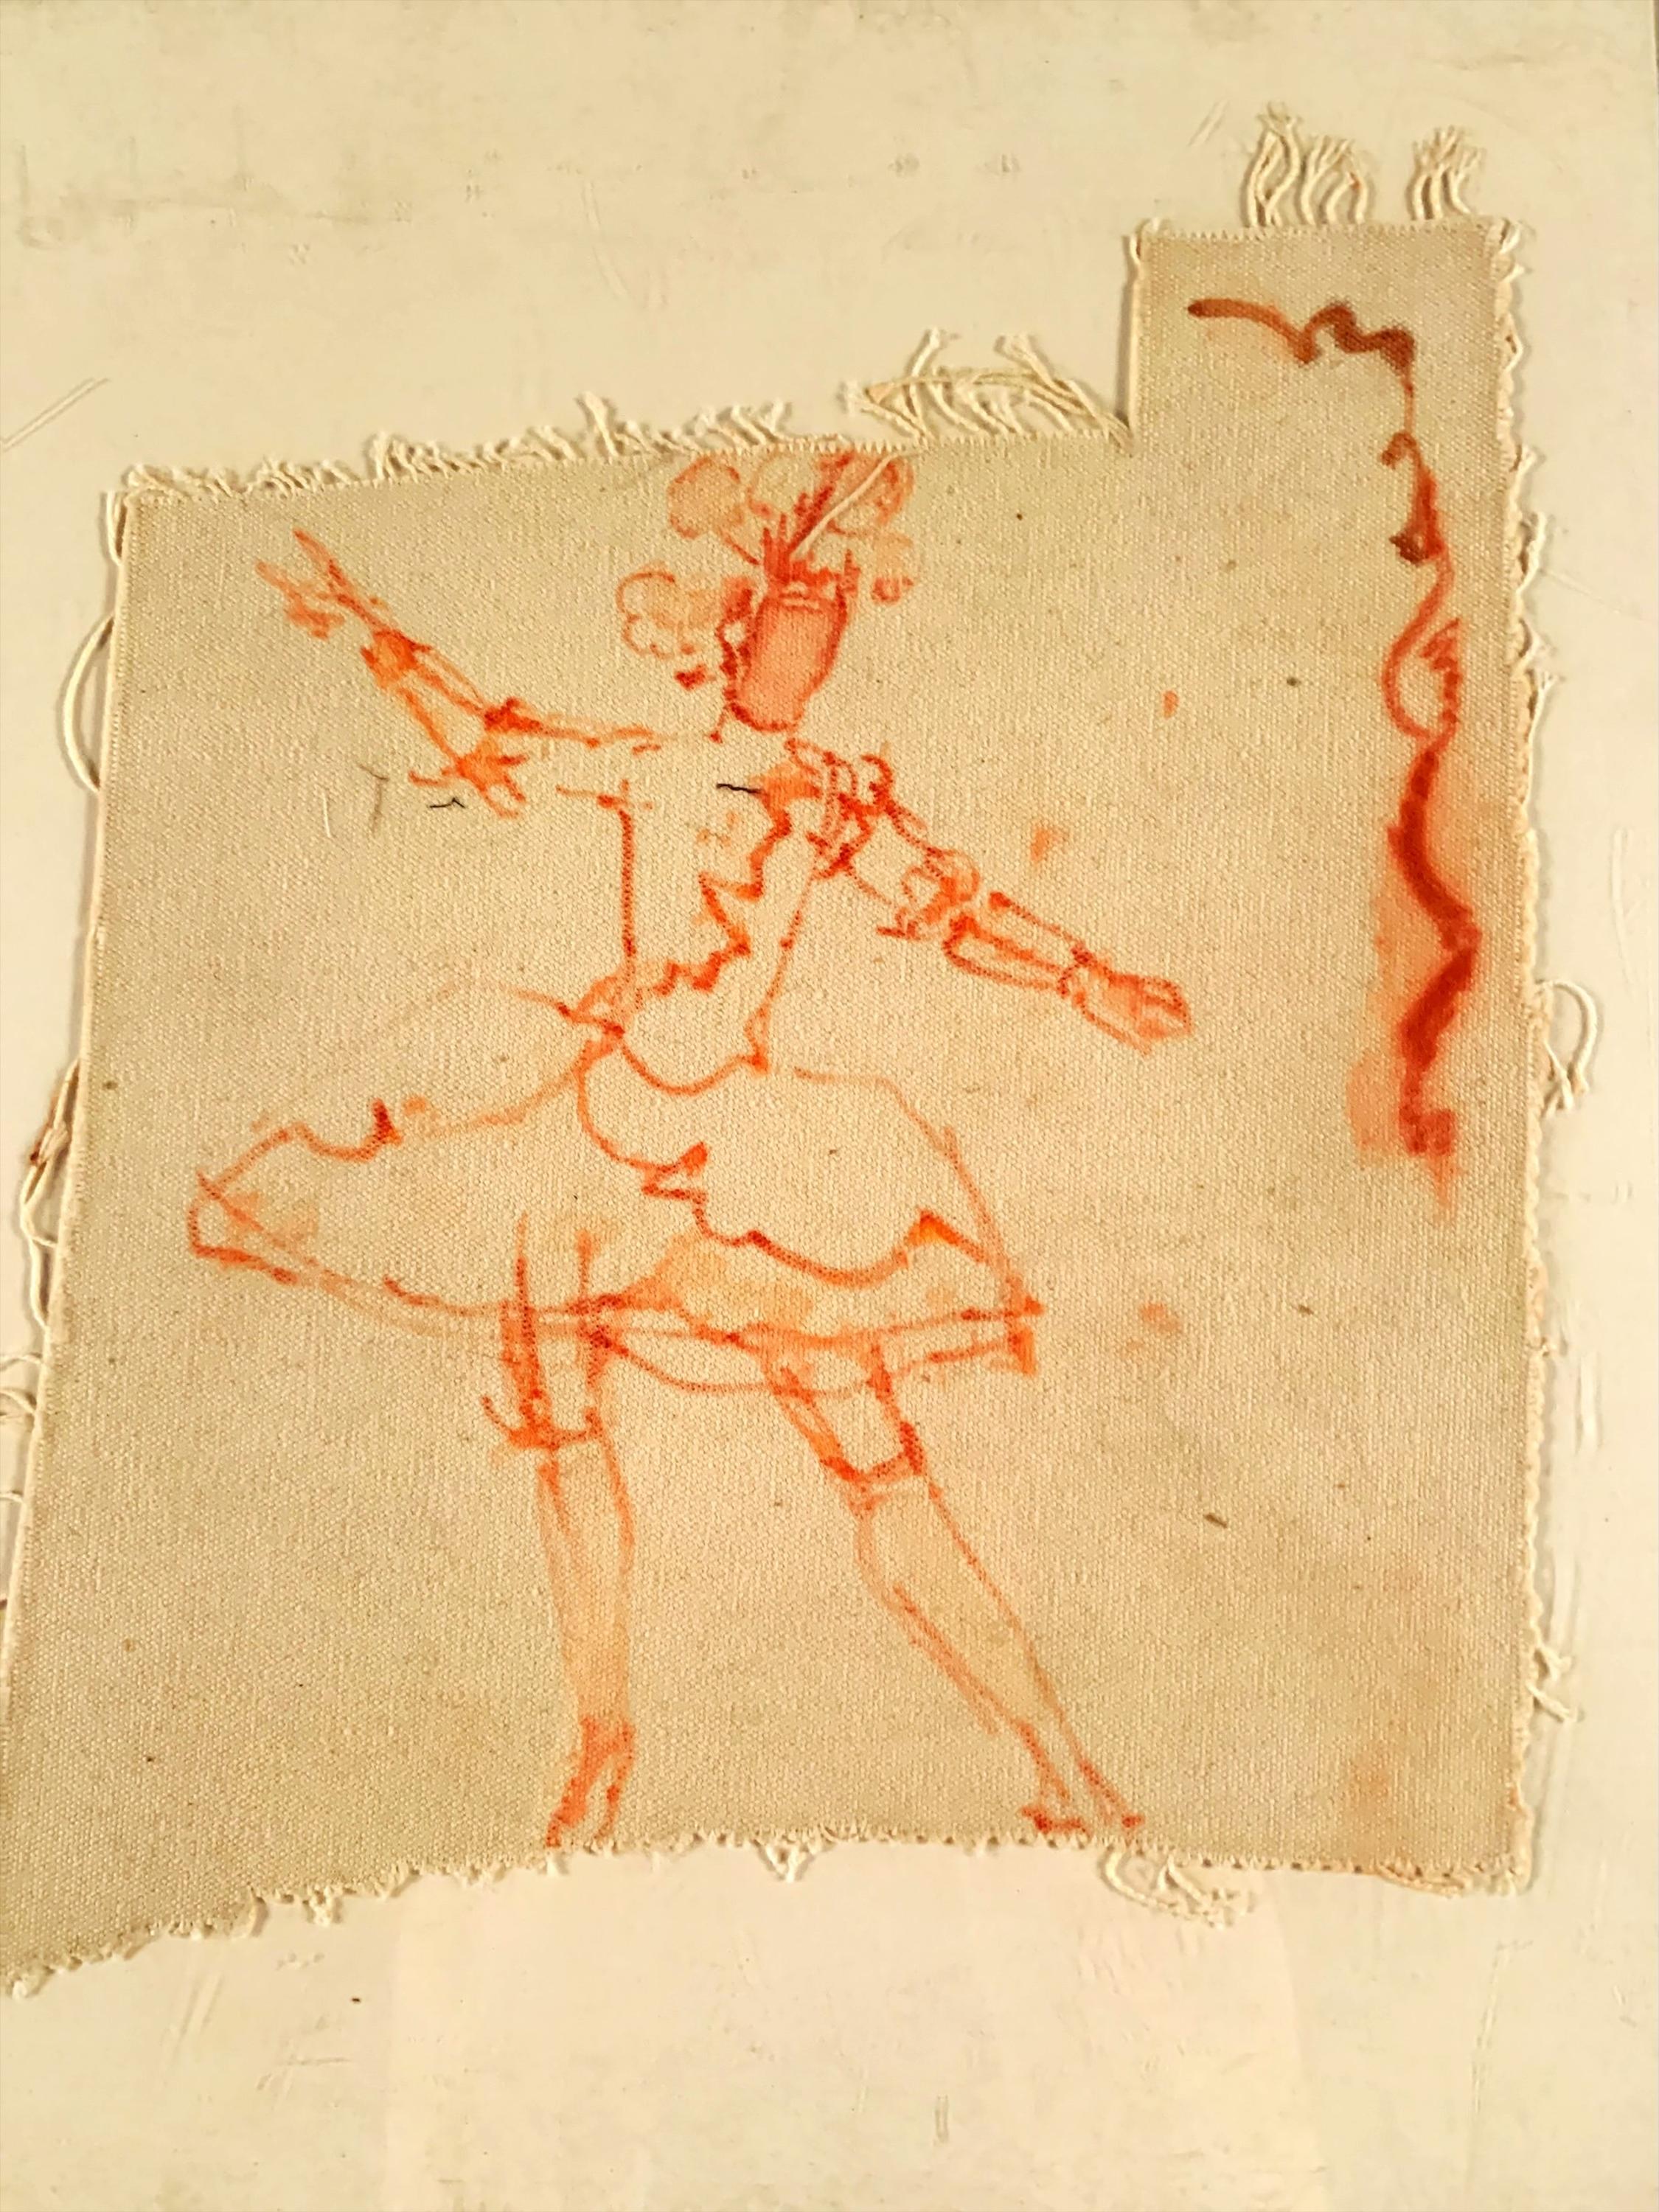 sketch of costumed dancer in headdress with arms outstretched